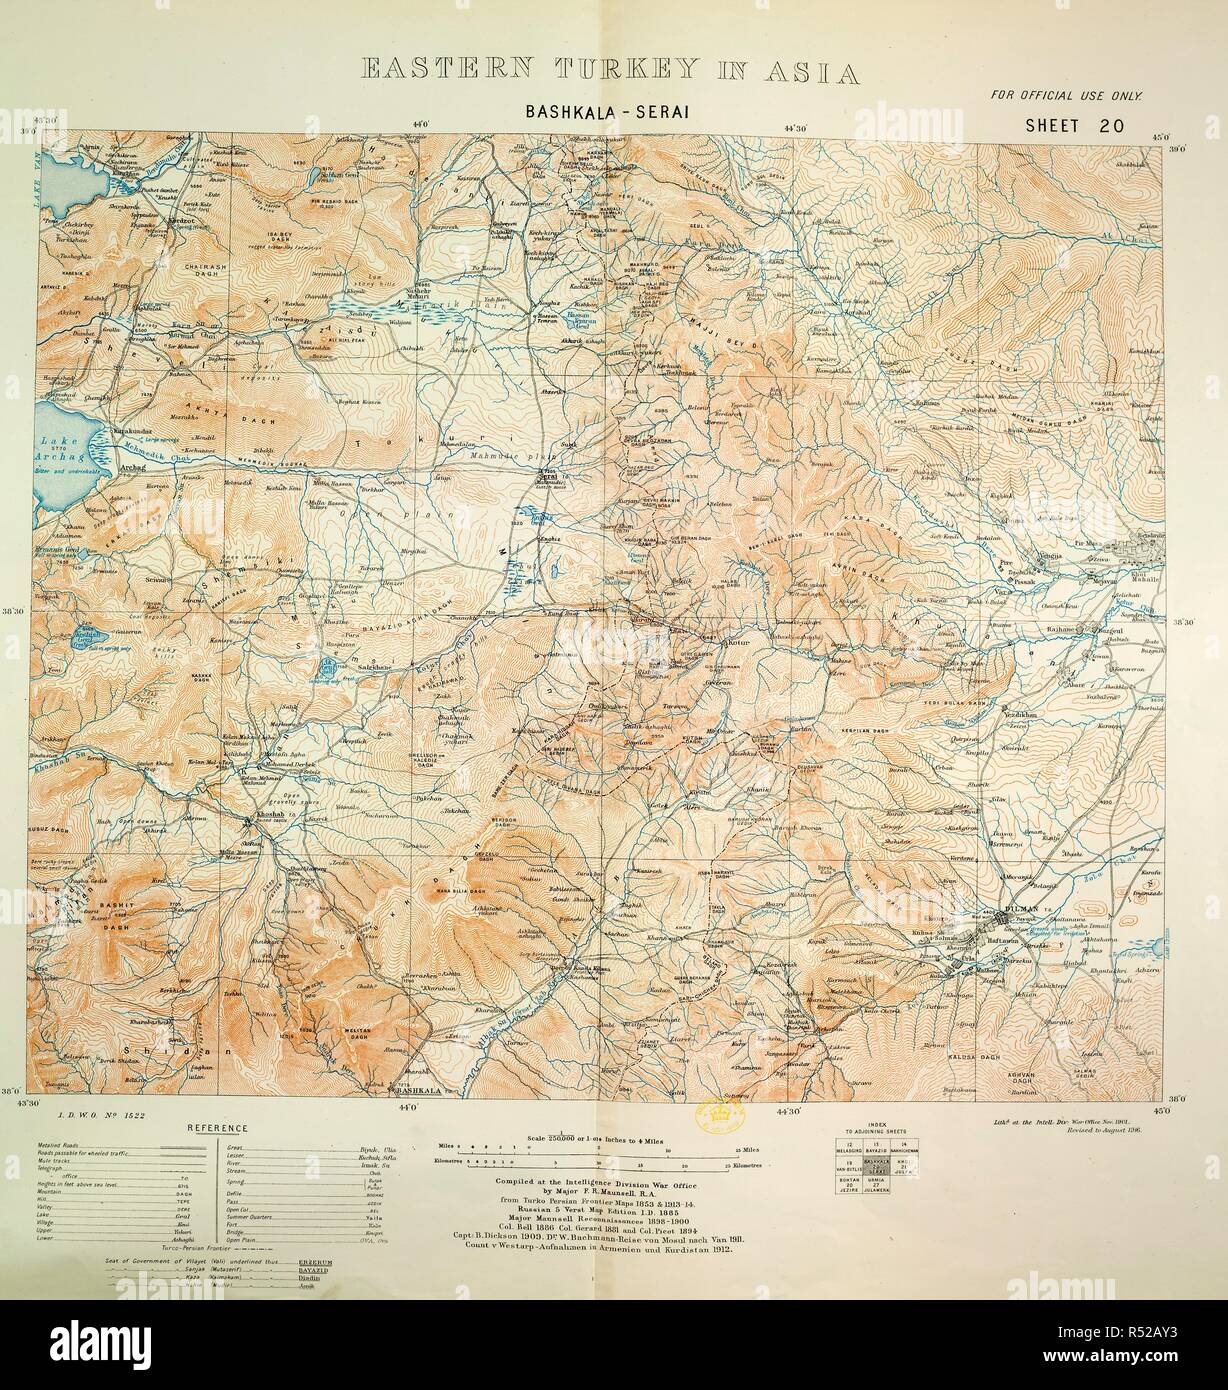 Bashkala - Serai. Eastern Turkey in Asia. Scale, 1 : 250,000, or 1.0. London : Geographical Section, General Staff, 1901. Source: Maps.152.d.2, sheet 20. Stock Photo